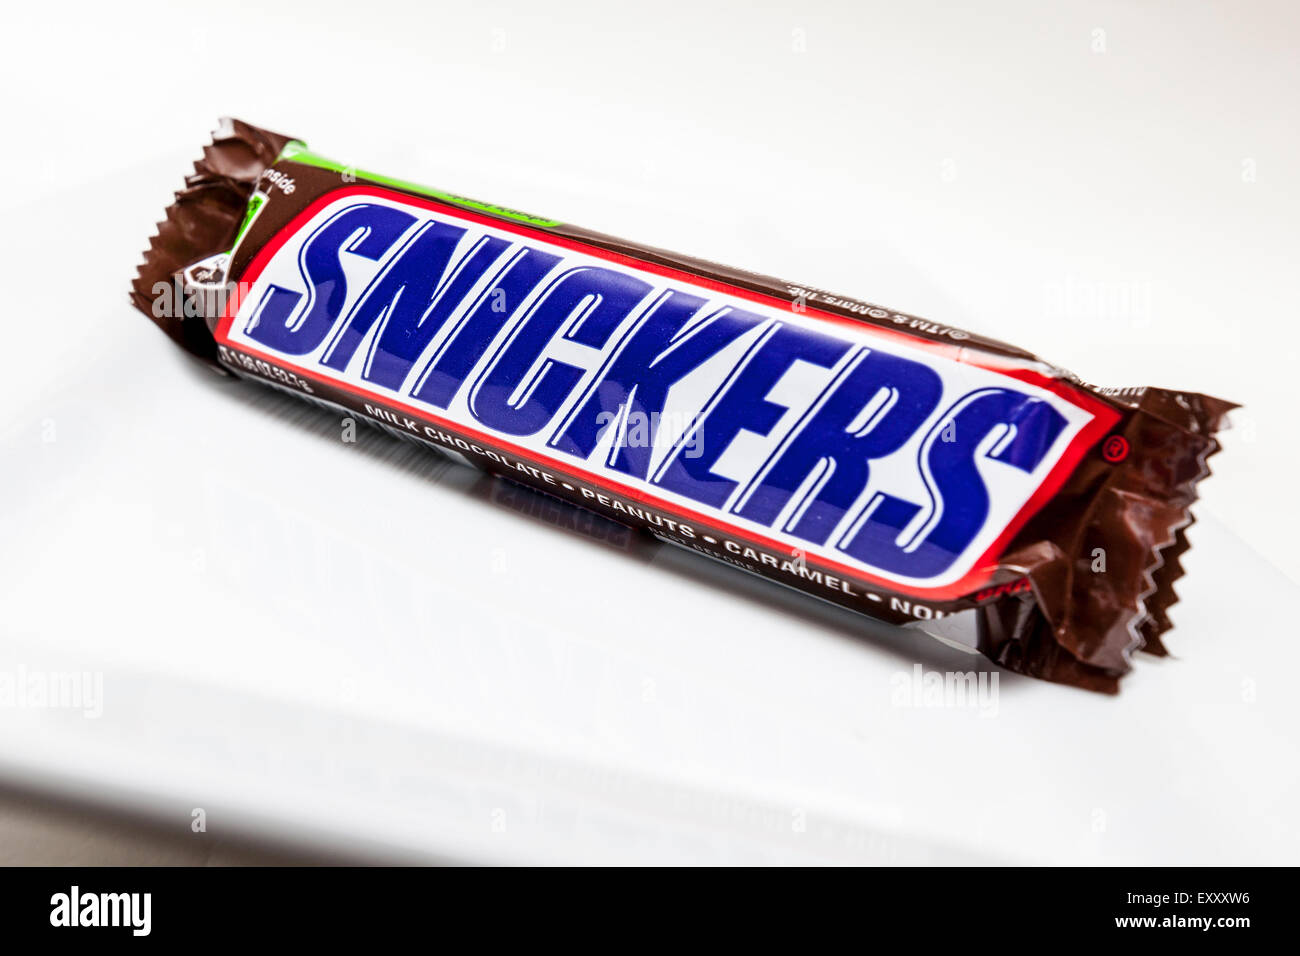 A Snickers Candy bar on a white background Stock Photo